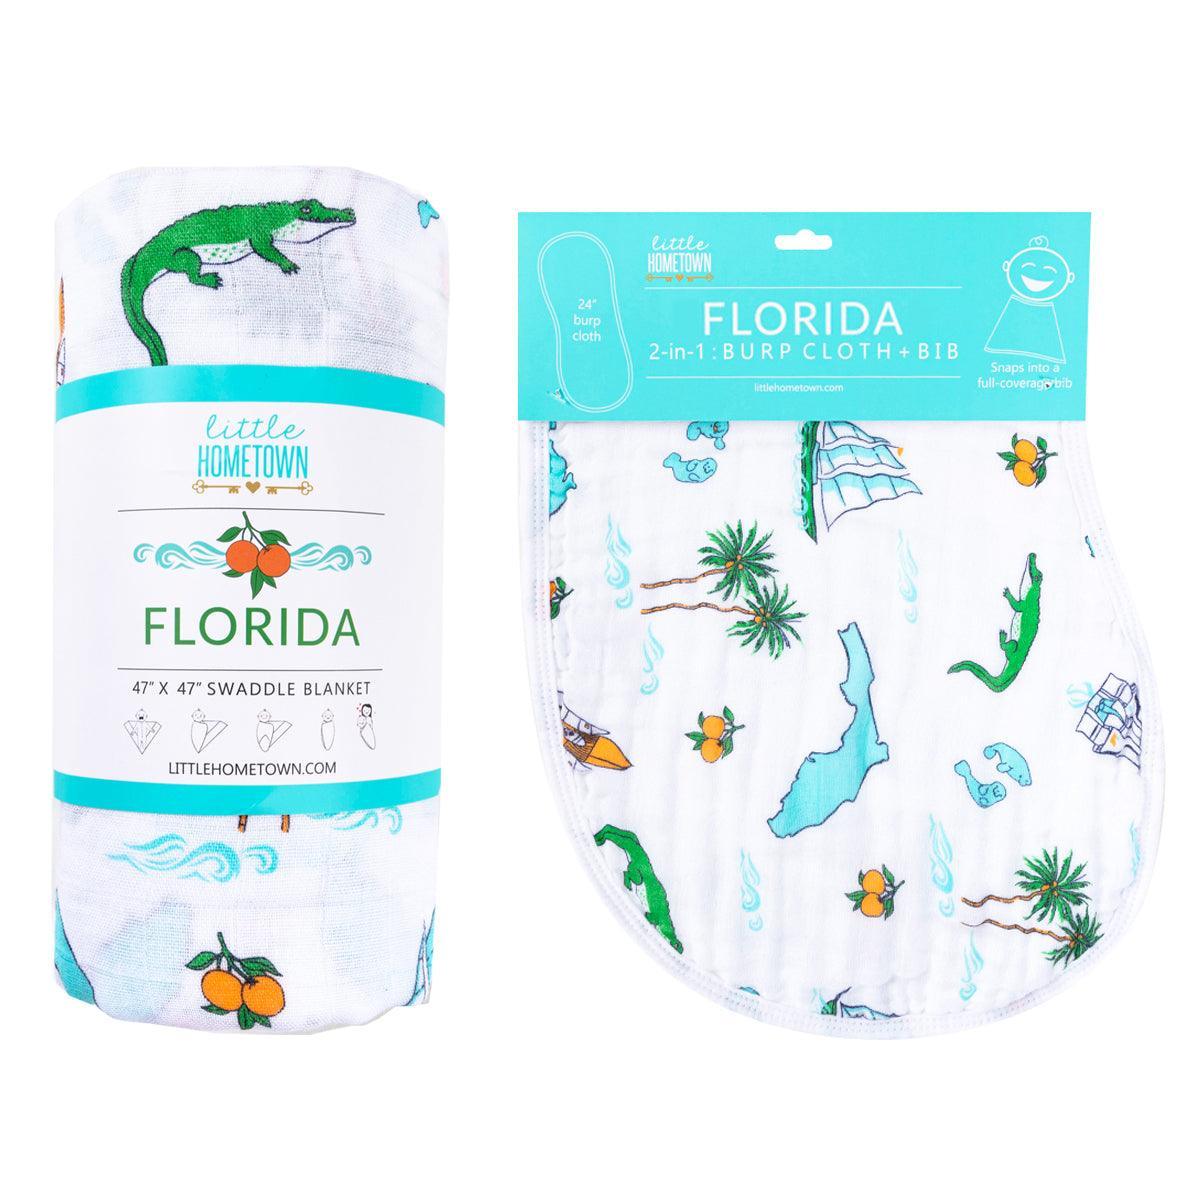 Florida-themed baby gift set with muslin swaddle blanket and burp cloth, featuring orange and green citrus prints.